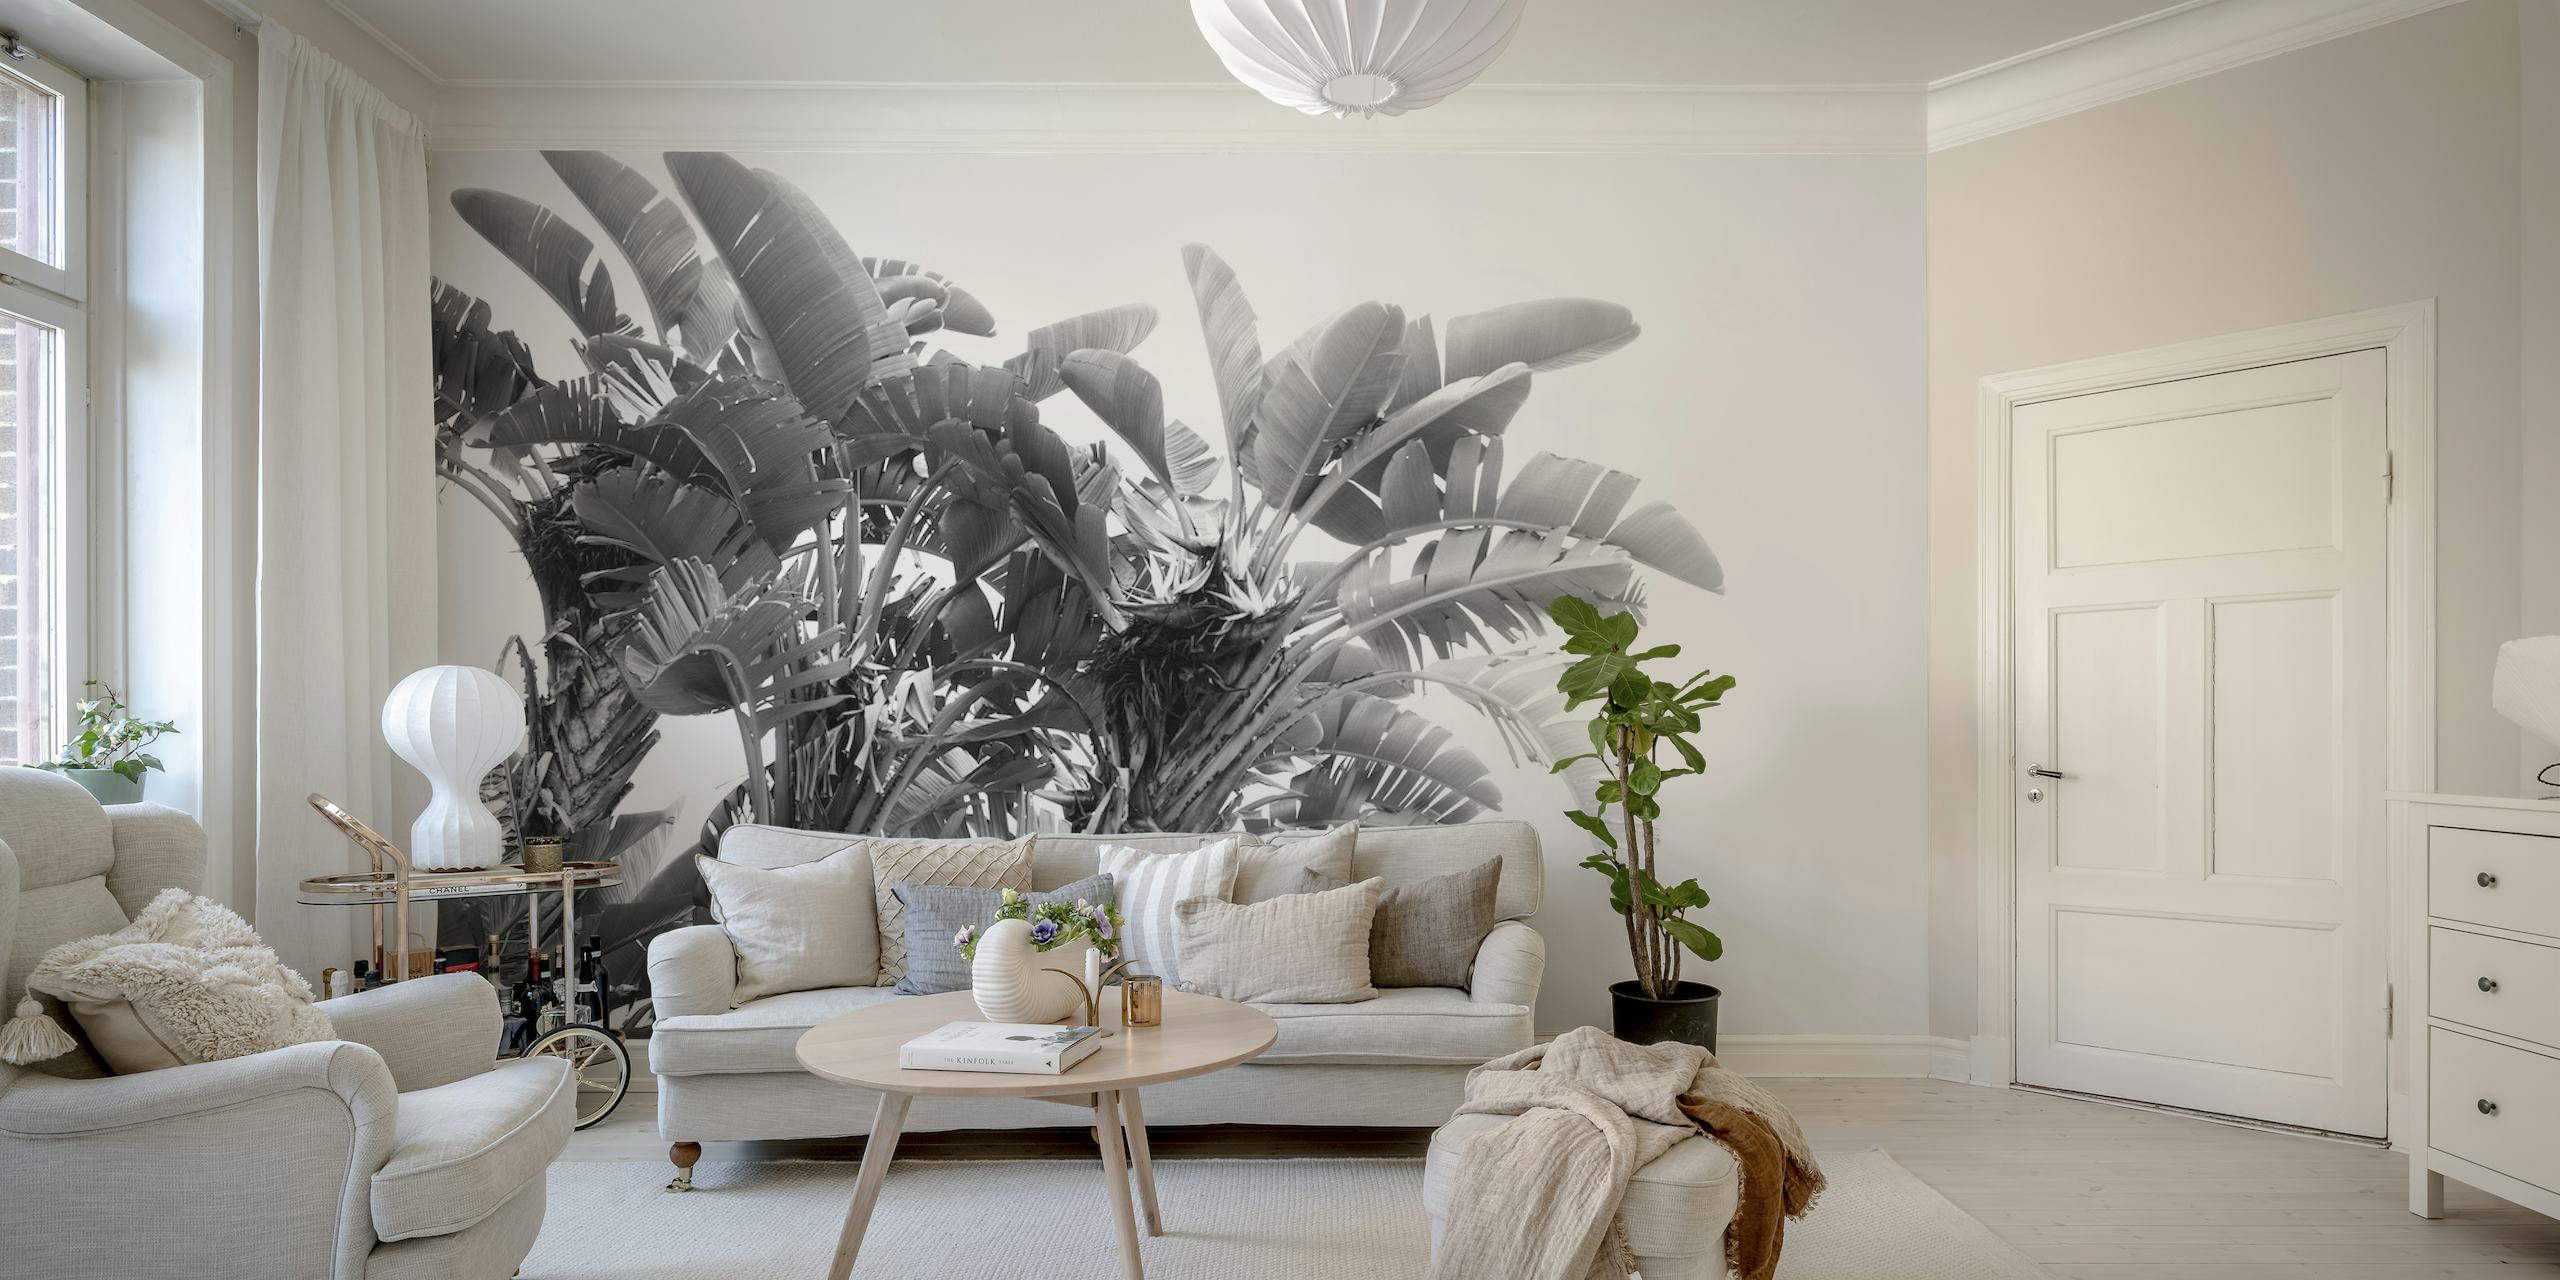 Monochrome banana leaf pattern wall mural from Happywall